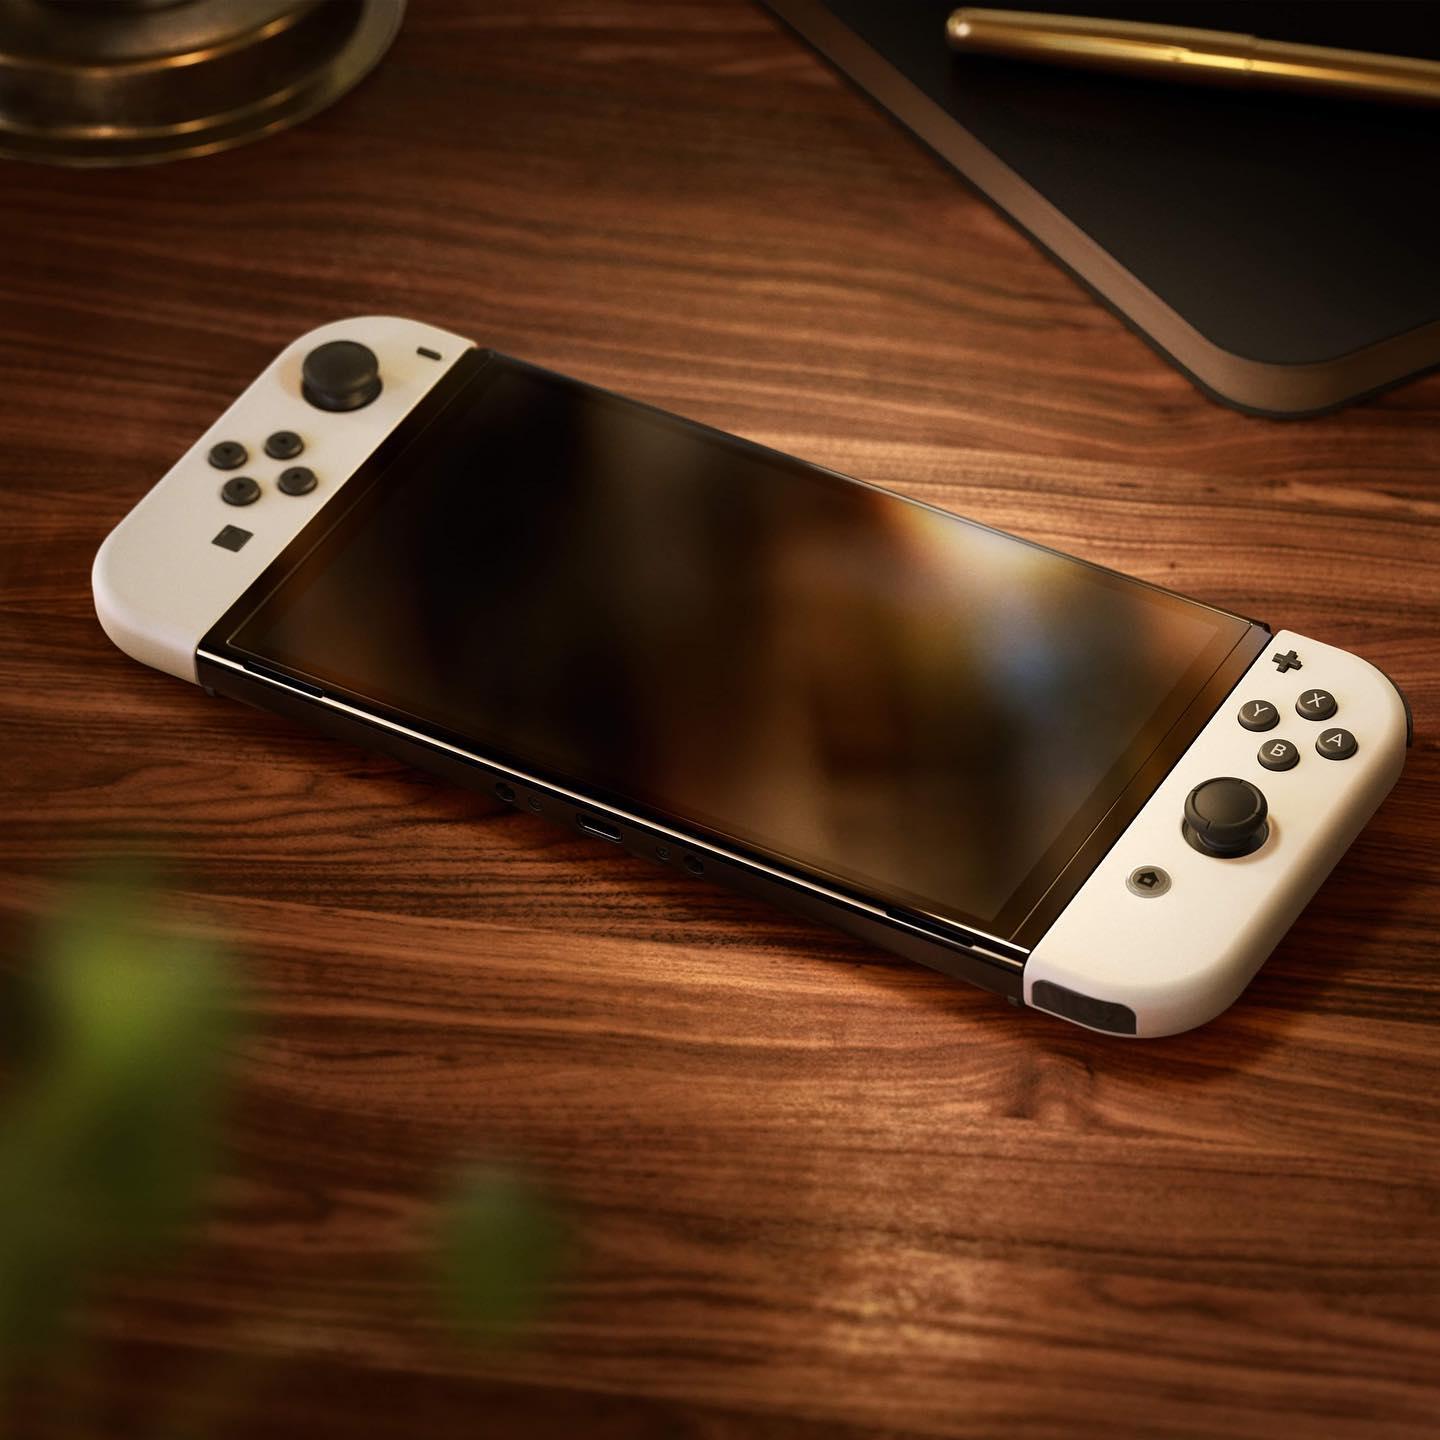 Nintendo Direct: Start Time, How to Watch Online - CNET